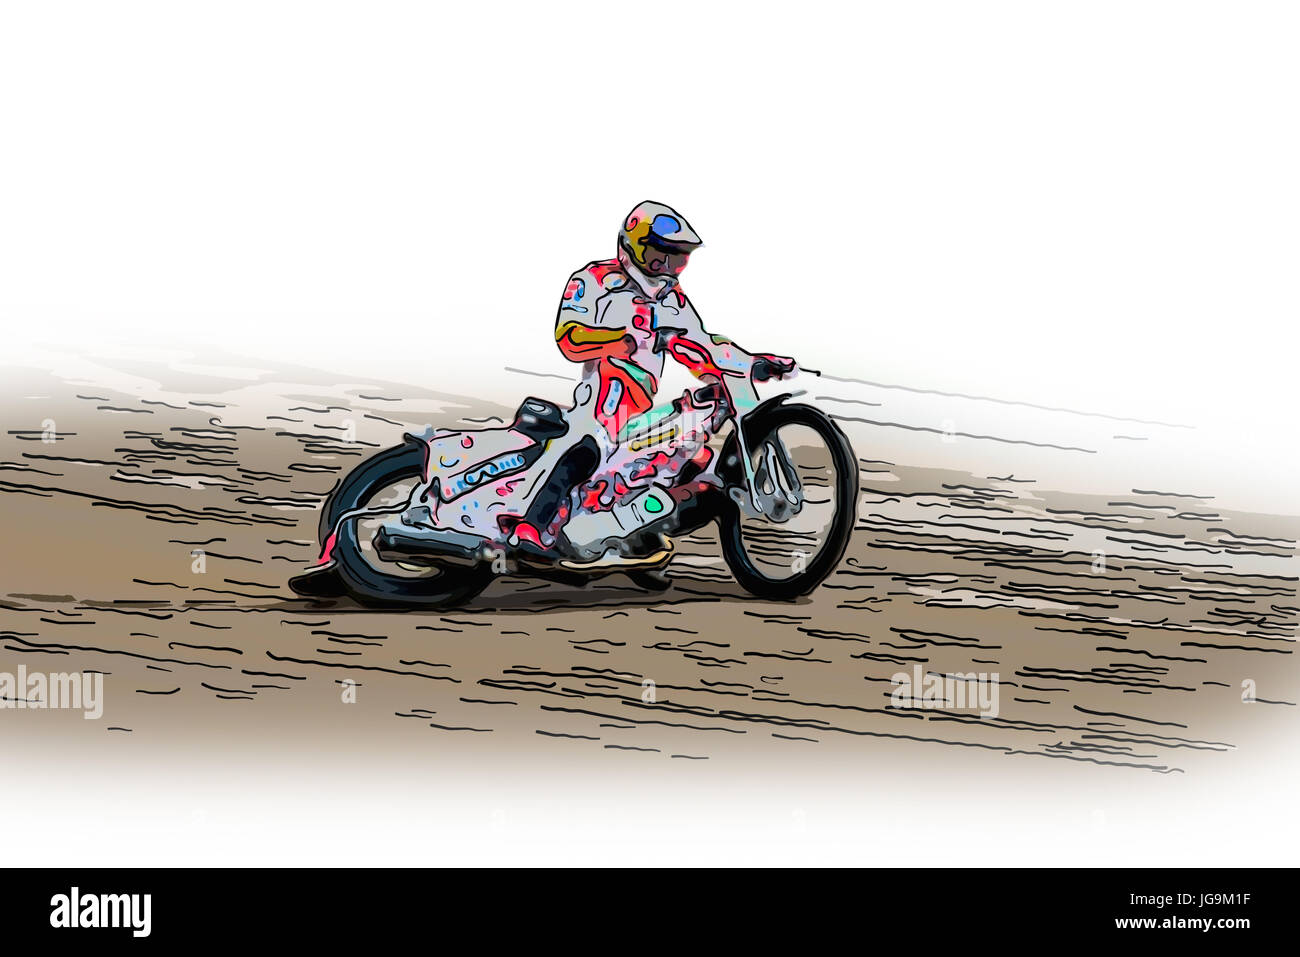 An illustration of a fast motorcycle on a speedway racing Stock Photo